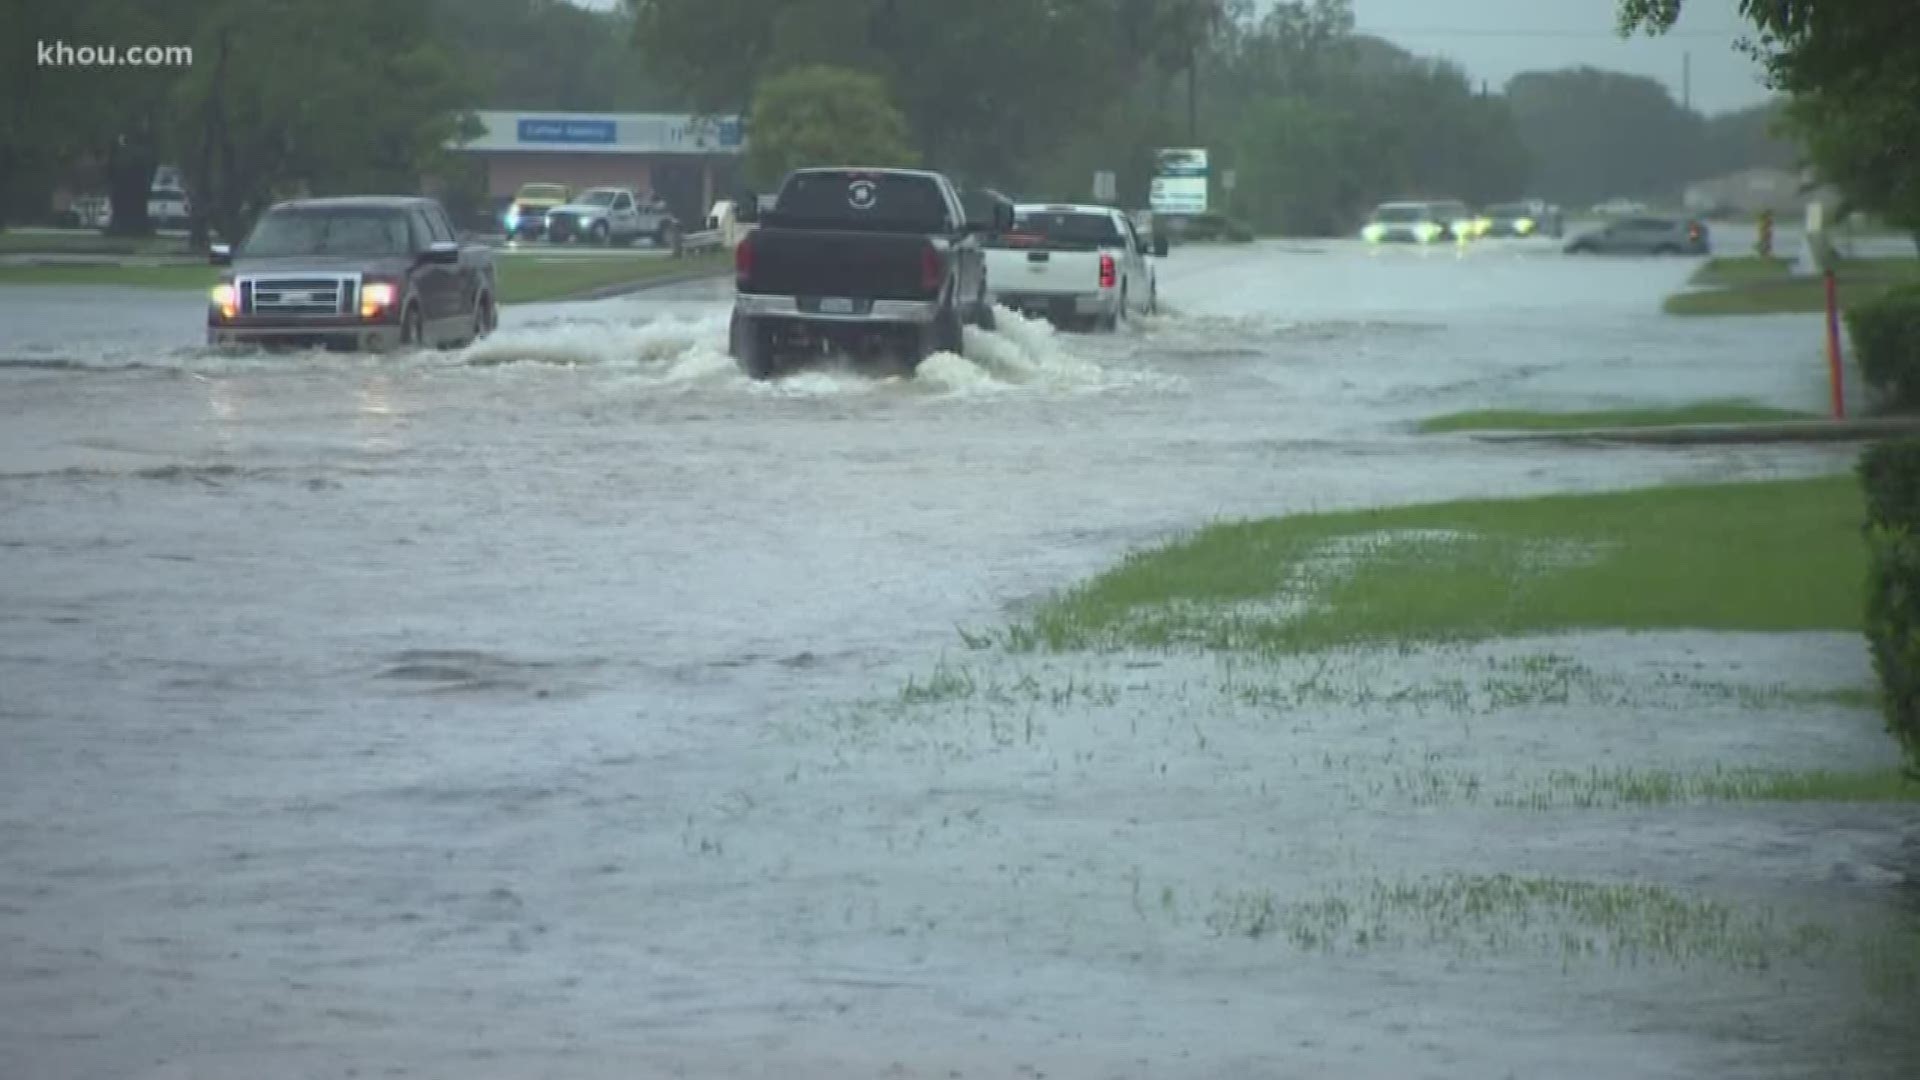 Many parents are sounding off on how they feel their school district handled Imelda’s flooding. Some are upset, but others are praising their district.